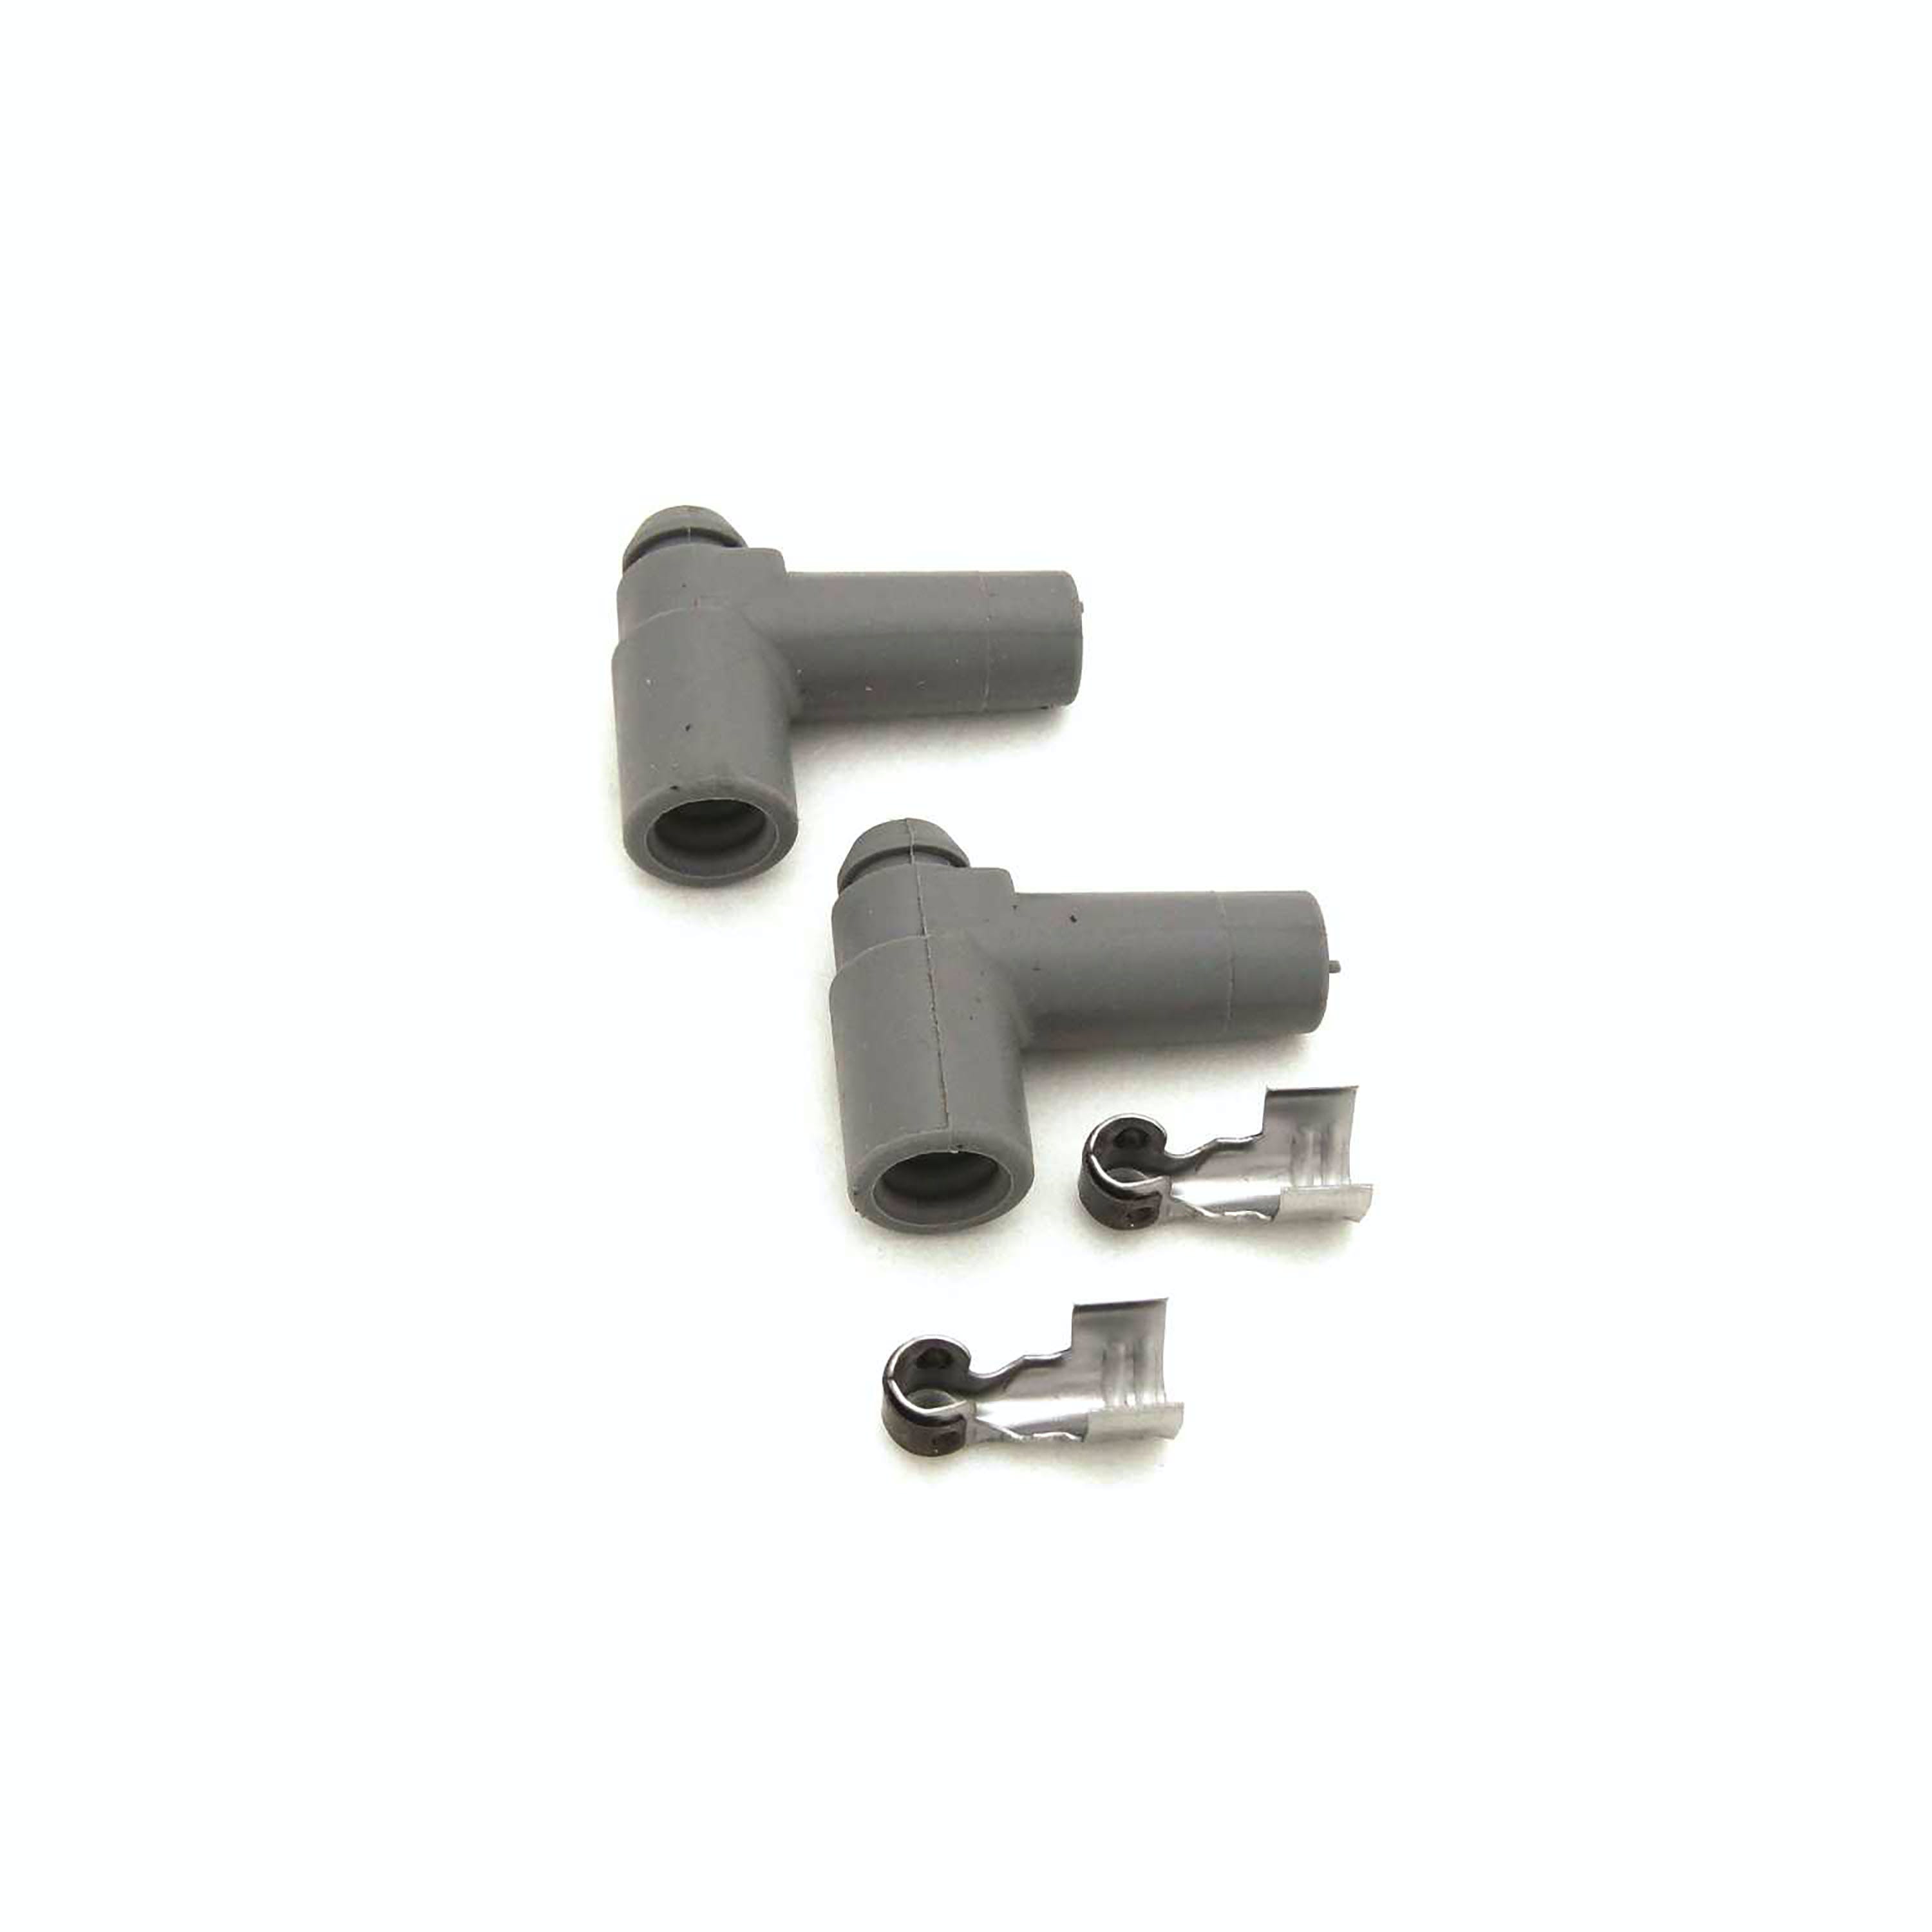 FAST - Fuel Air Spark Technology 255-0032-25 25 Pack of 90 Degree HEI Spak Plug Boots and Terminals